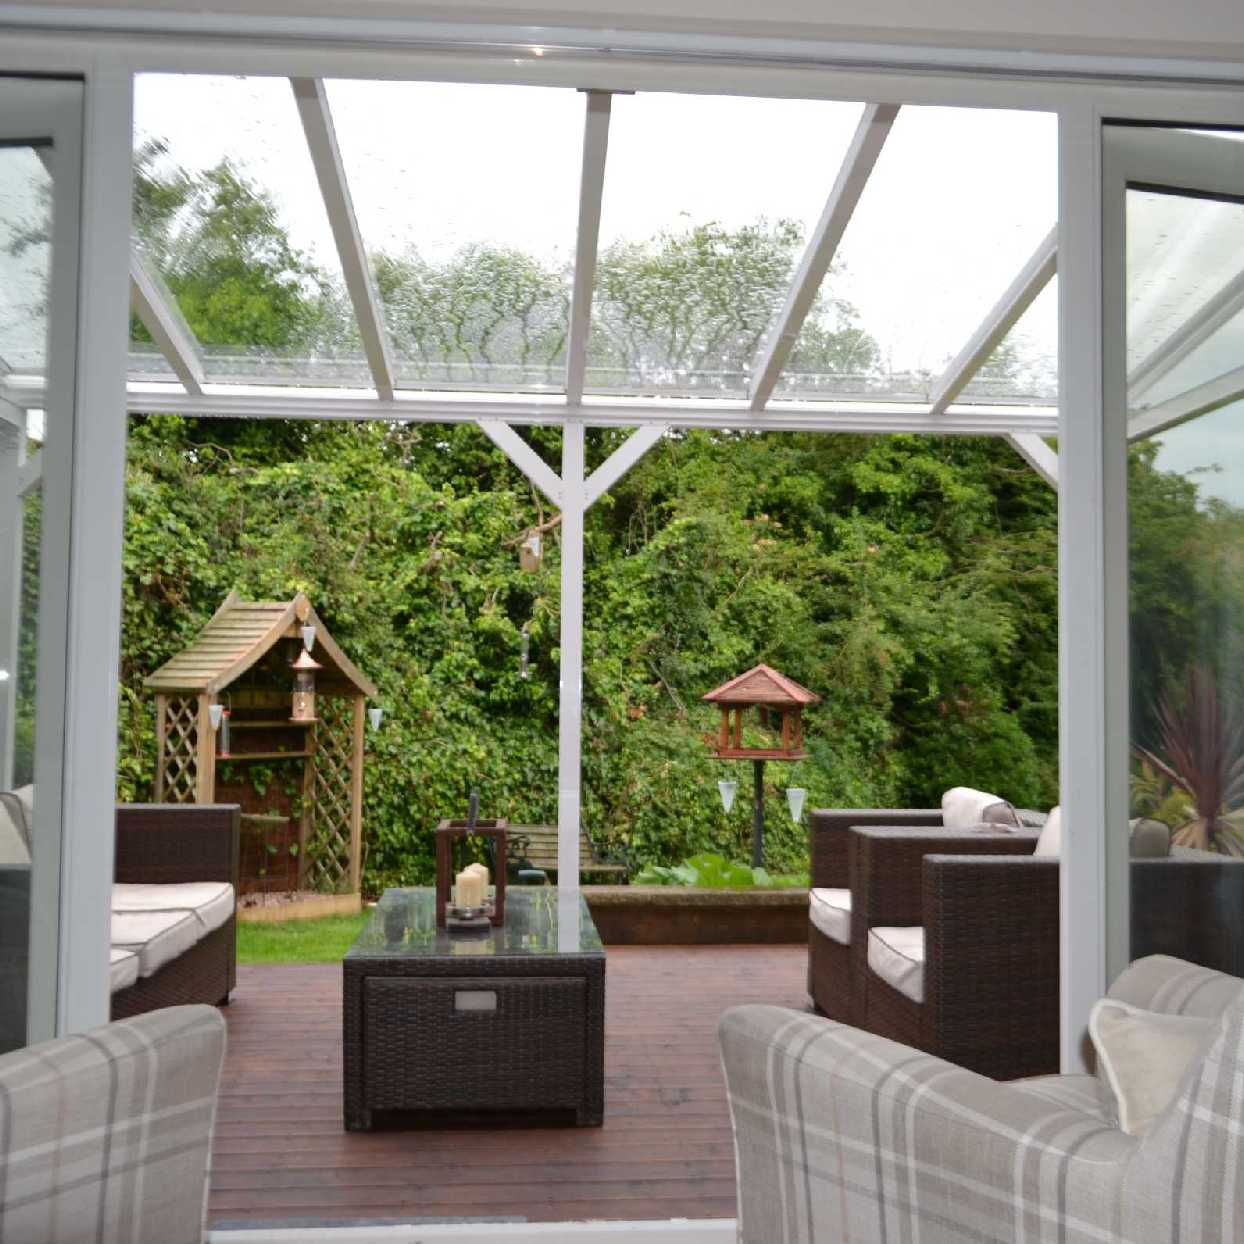 Buy Omega Smart Free-Standing, White MonoPitch Roof Canopy with 6mm Glass Clear Plate Polycarbonate Glazing - 4.9m (W) x 2.0m (P), (8) Supporting Posts online today